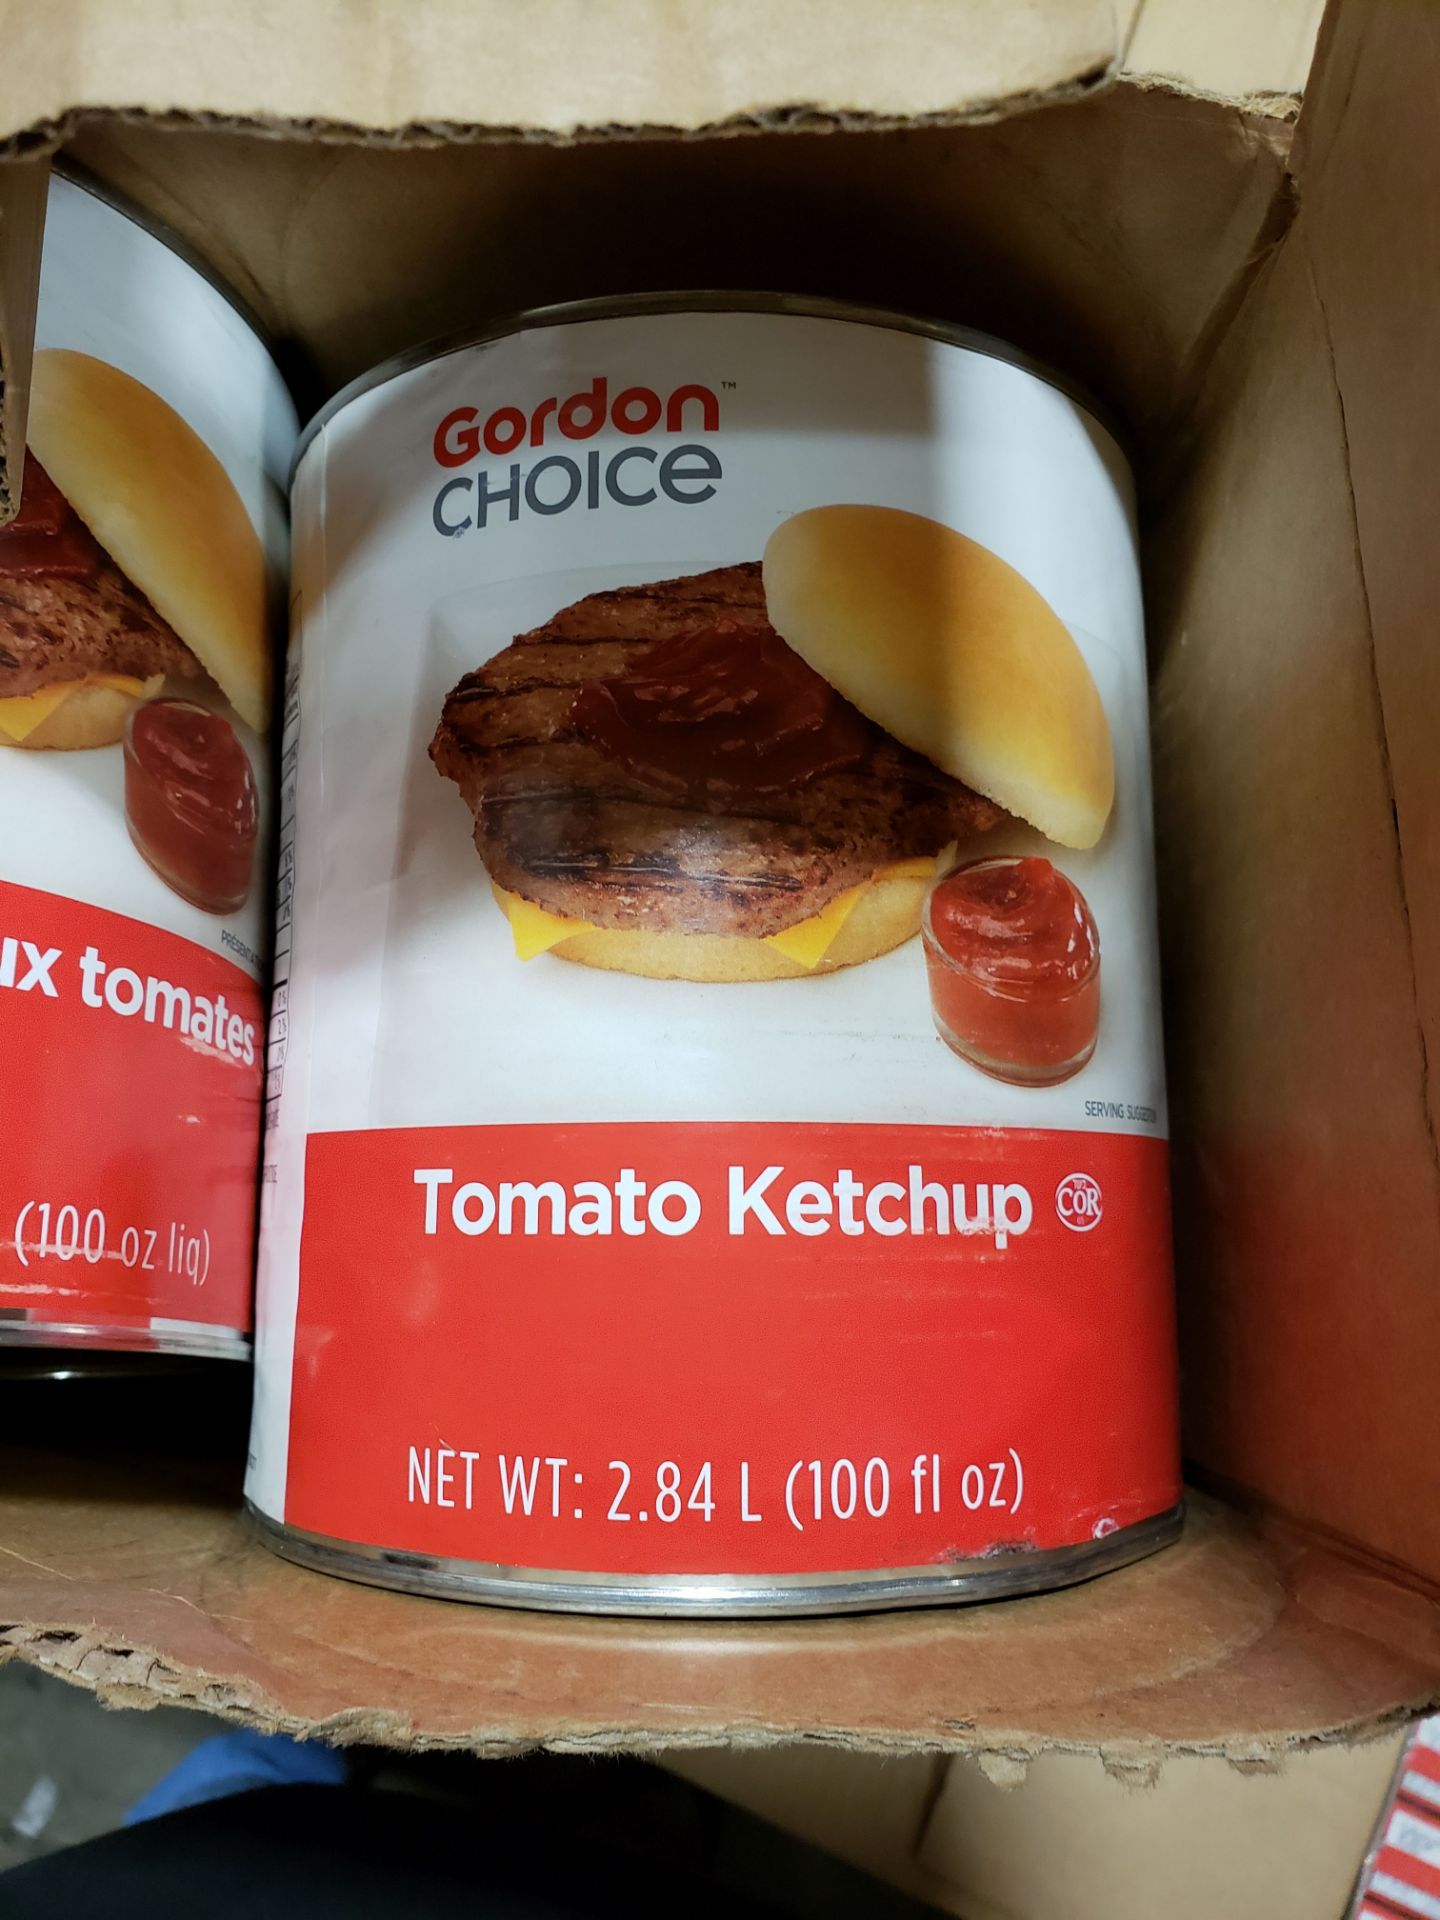 GFS Tomato Ketchup - 6 x 2.84lt Cans